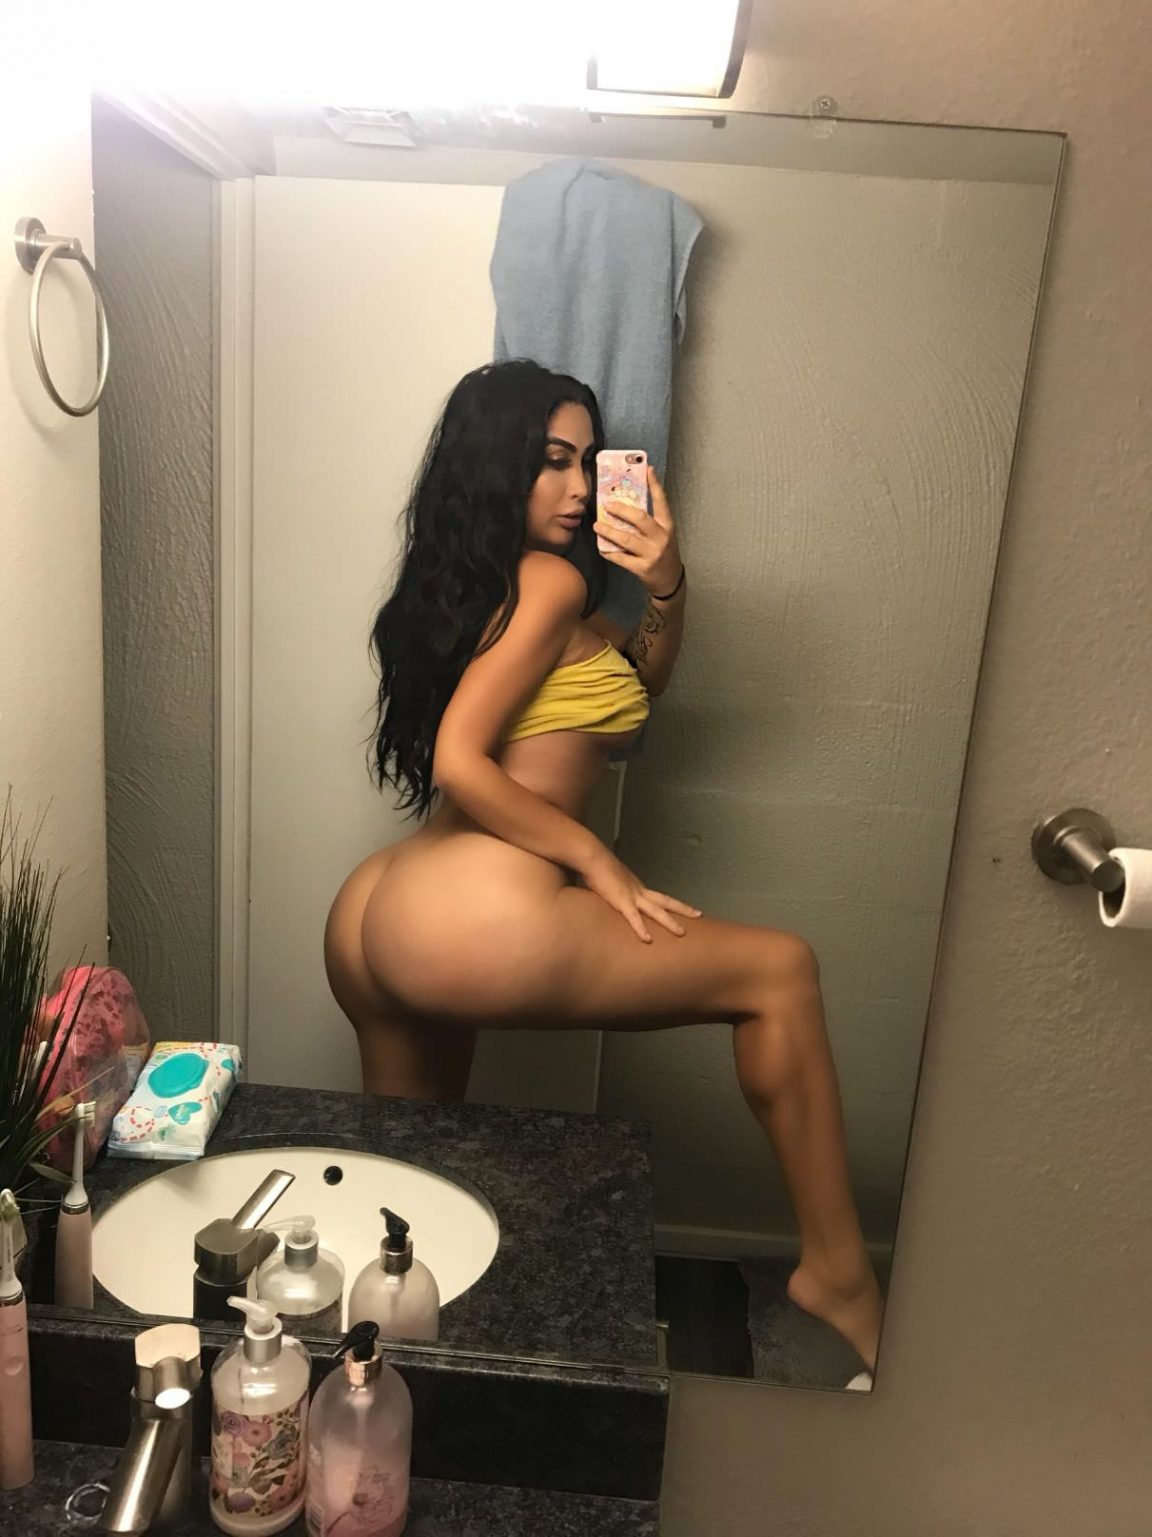 Mexican Barbie Sex Tape and Nudes Leak On Thothub pic